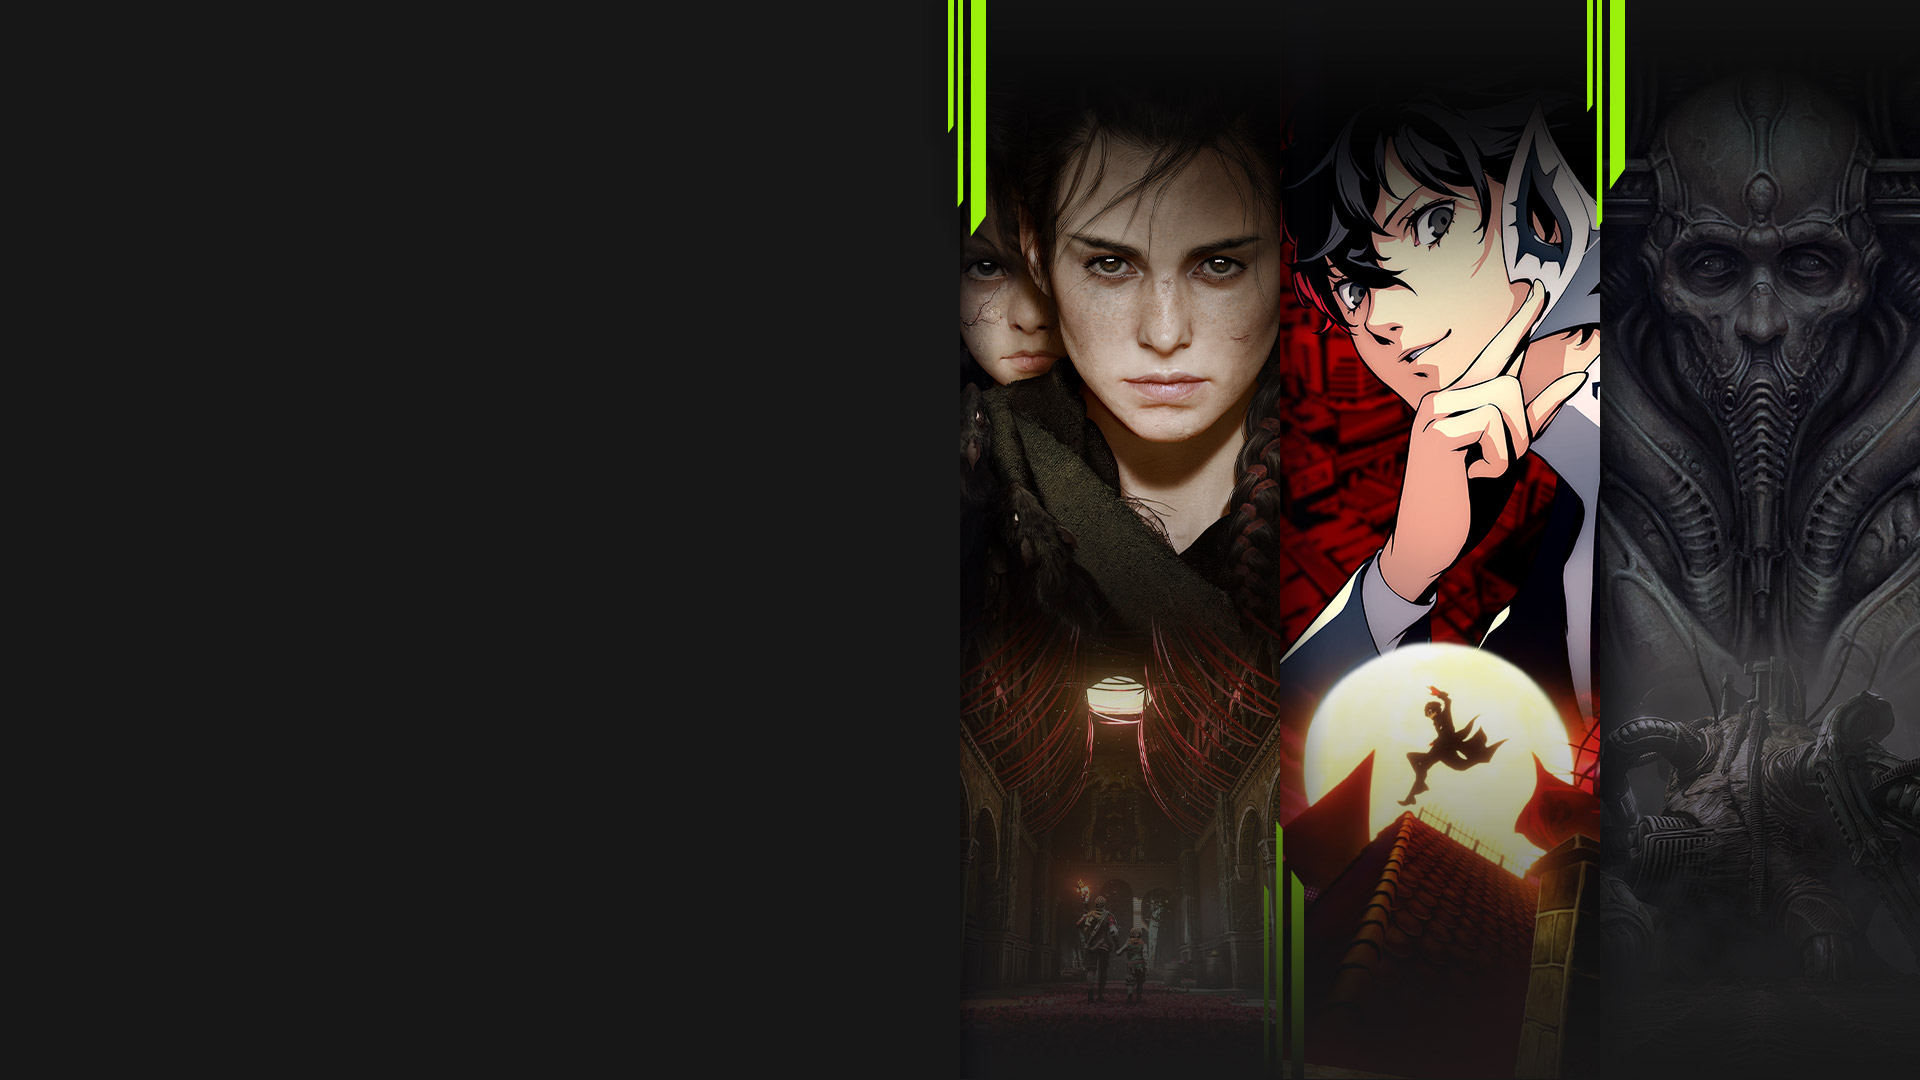 Game art from multiple games available now with Xbox Game Pass including A Plague Tale: Requiem, Persona 5 Royal, Scorn, and Chivalry 2